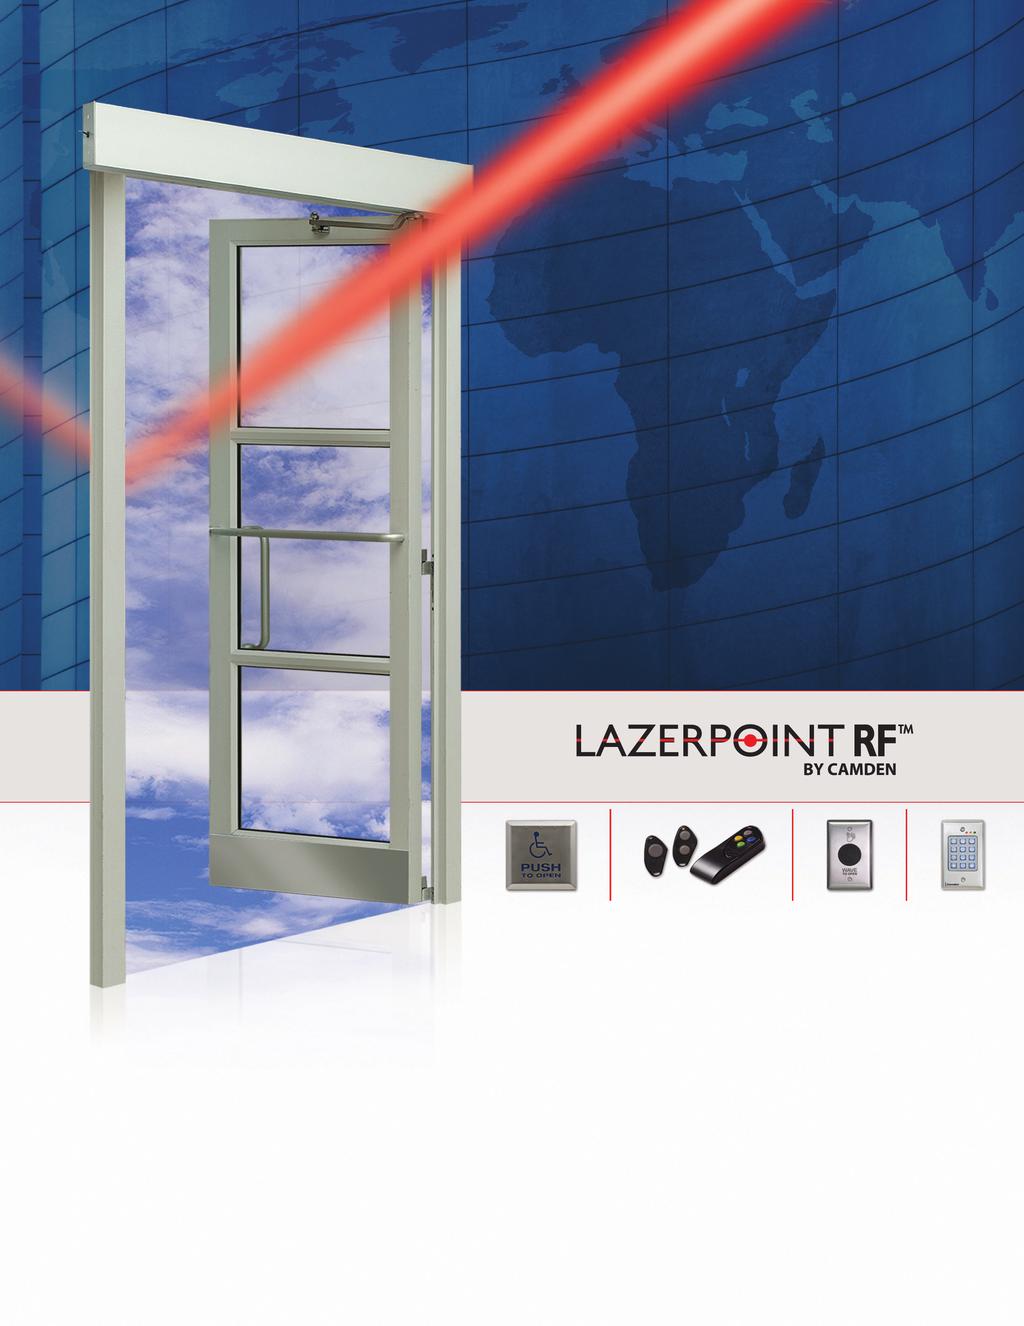 The World s Most Advanced Wireless Door Control System Only LAZERPOINT RF provides the largest selection of